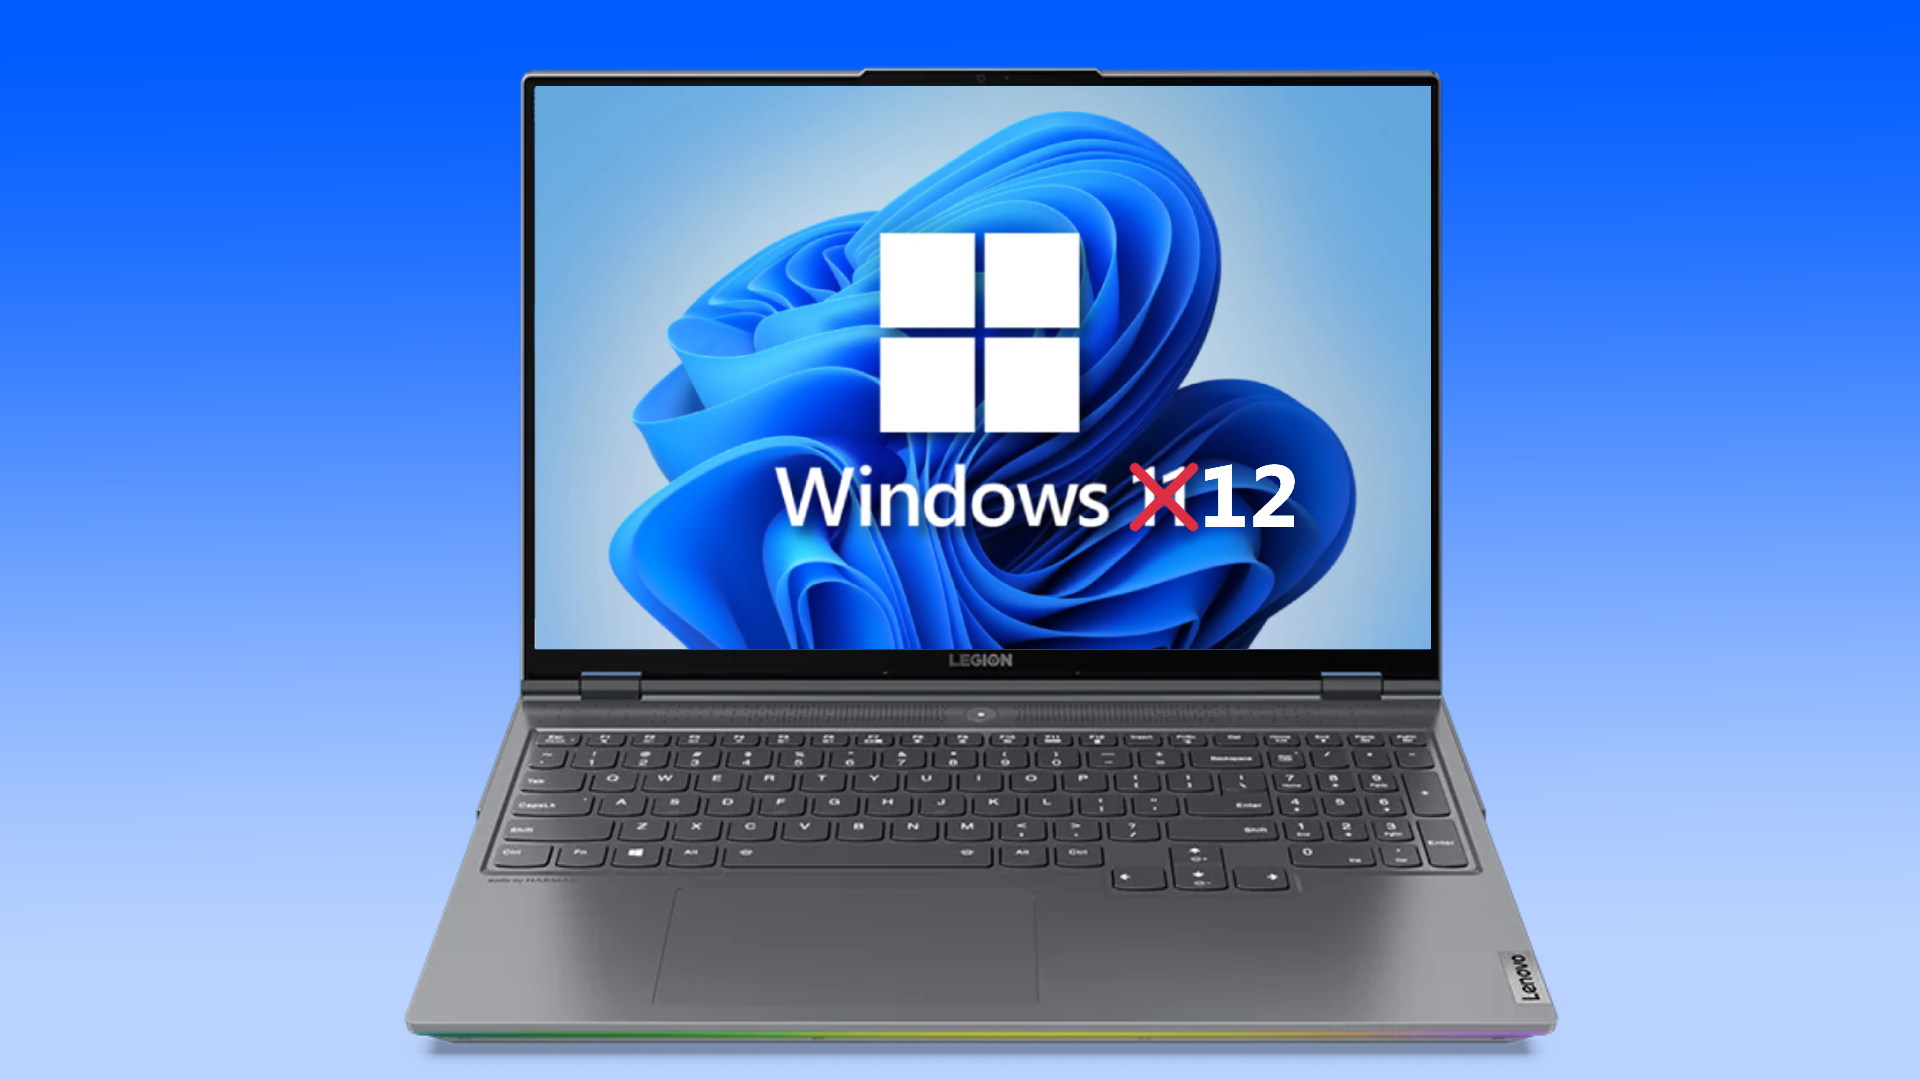 Forget Windows 11, Windows 12 is apparently releasing soon | PCGamesN